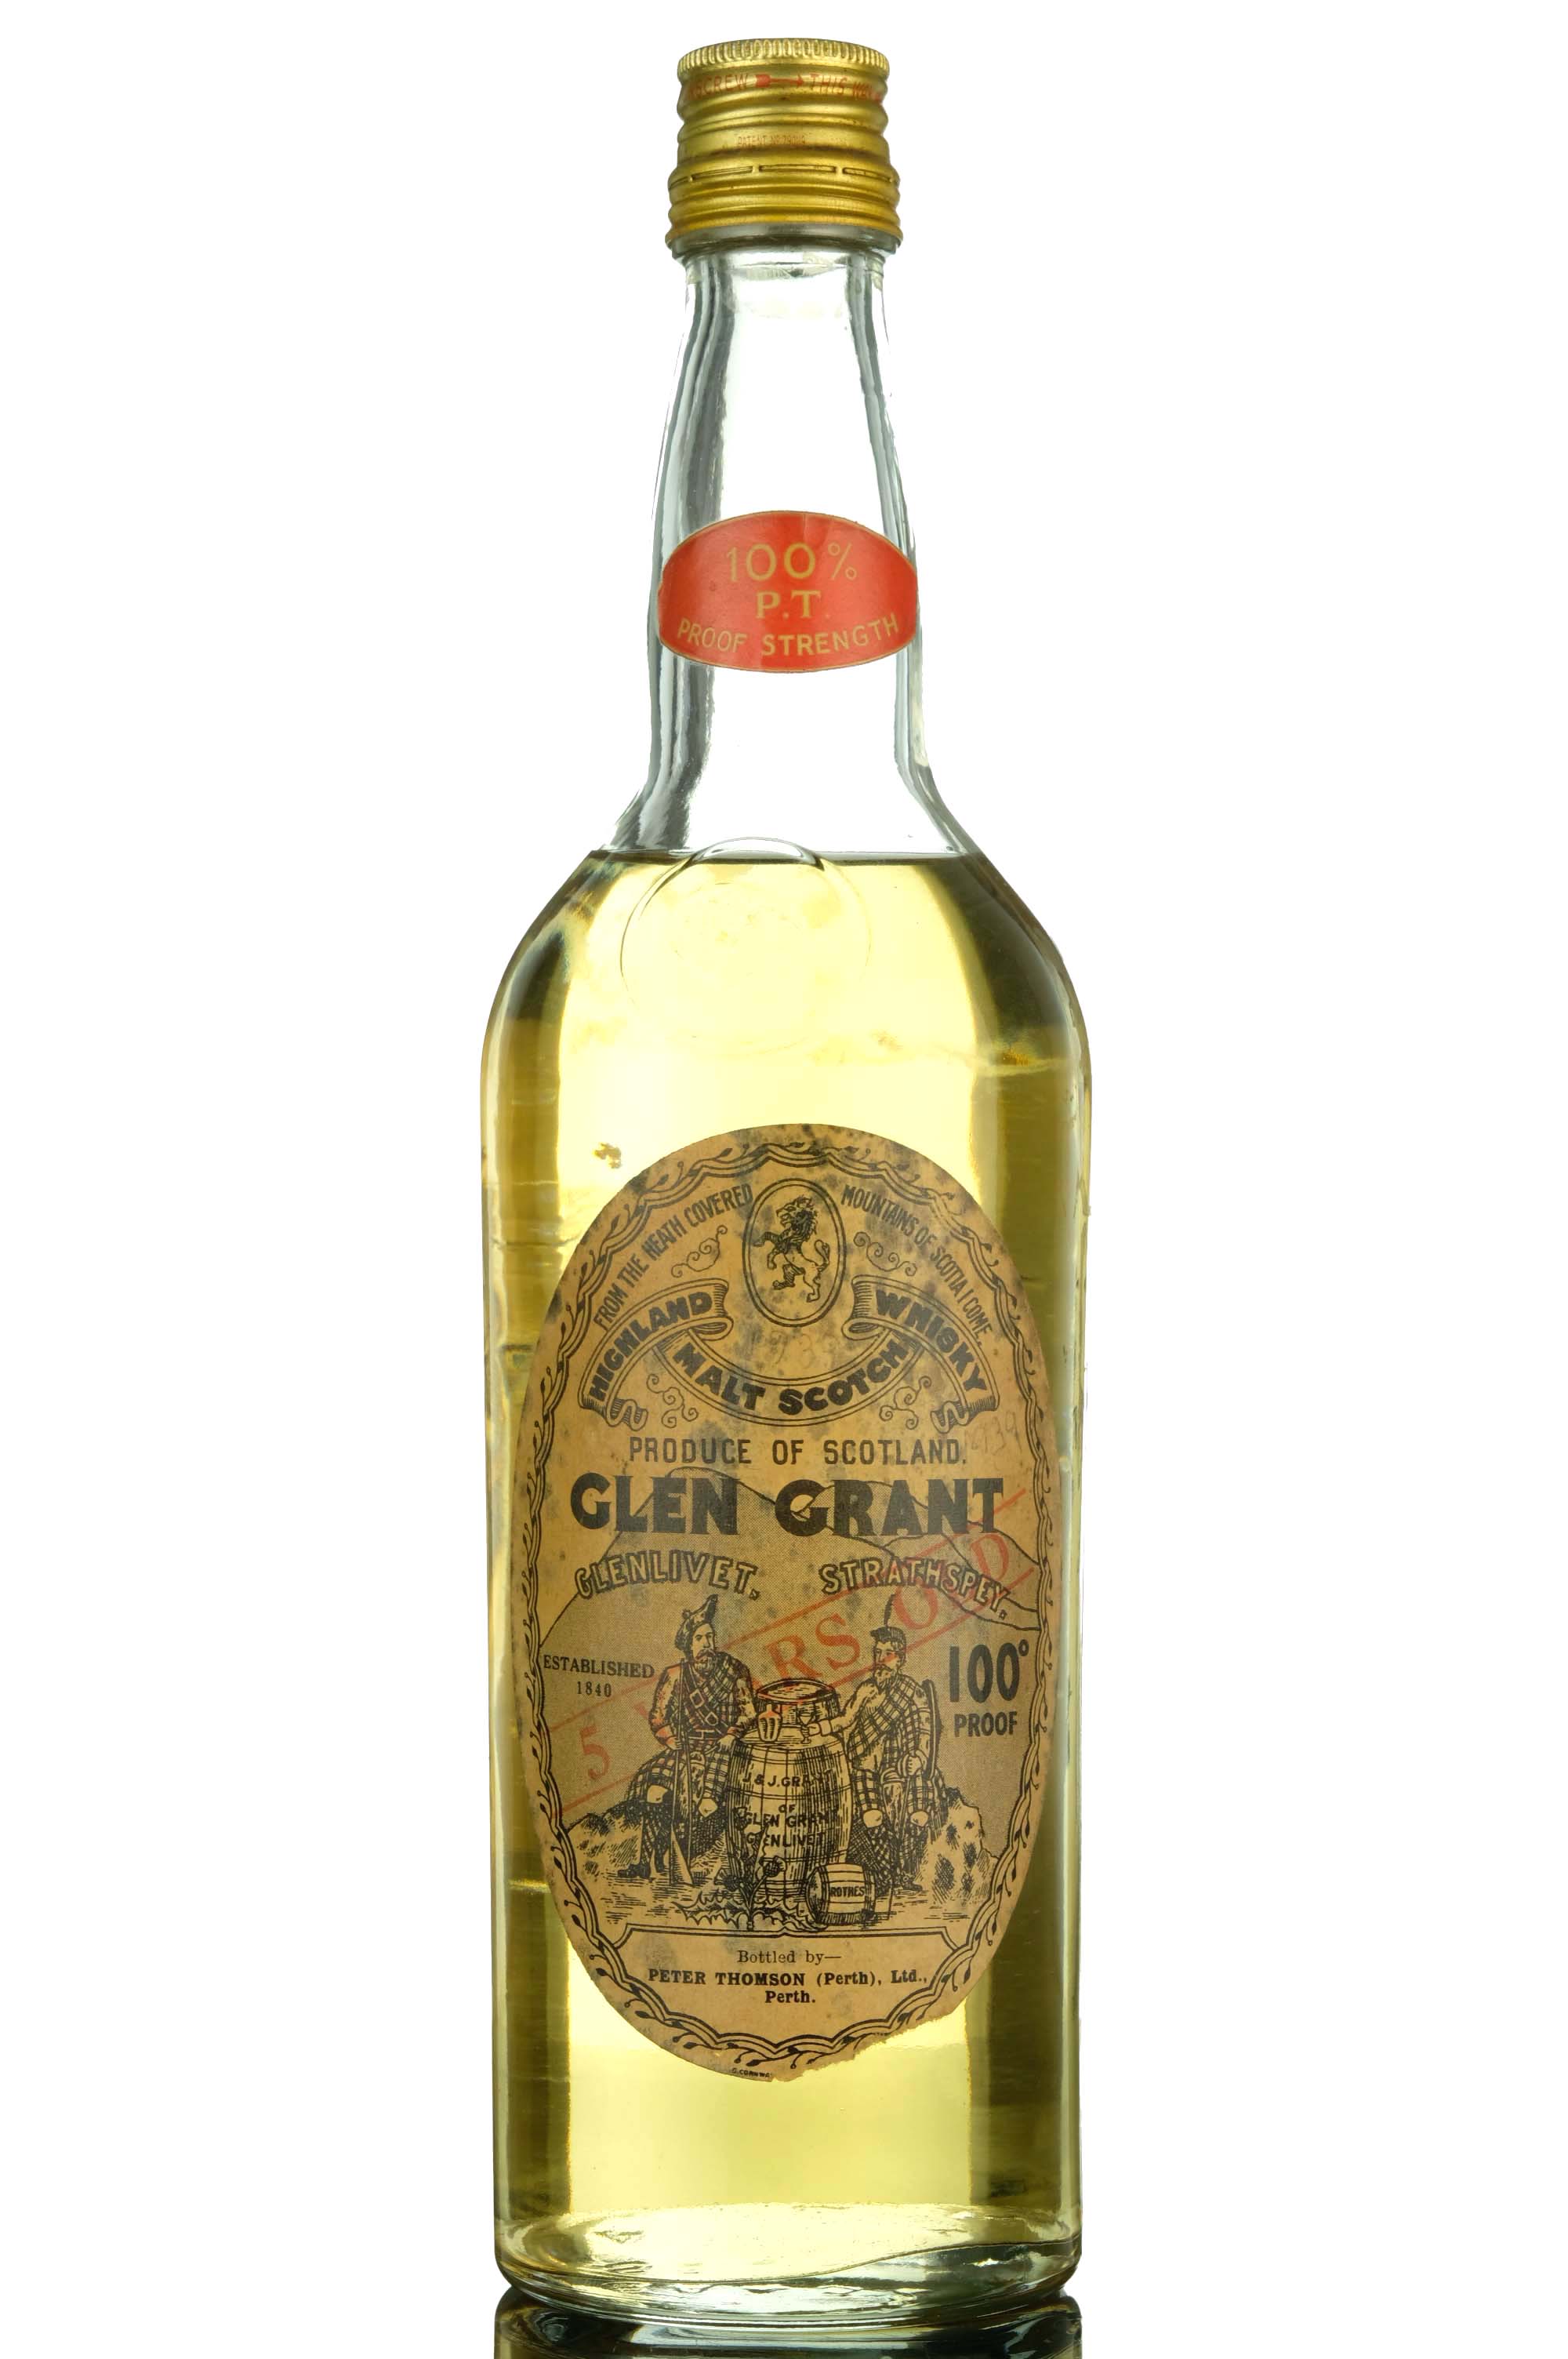 Glen Grant 5 Year Old - Peter Thomson - Early 1960s - 100 Proof